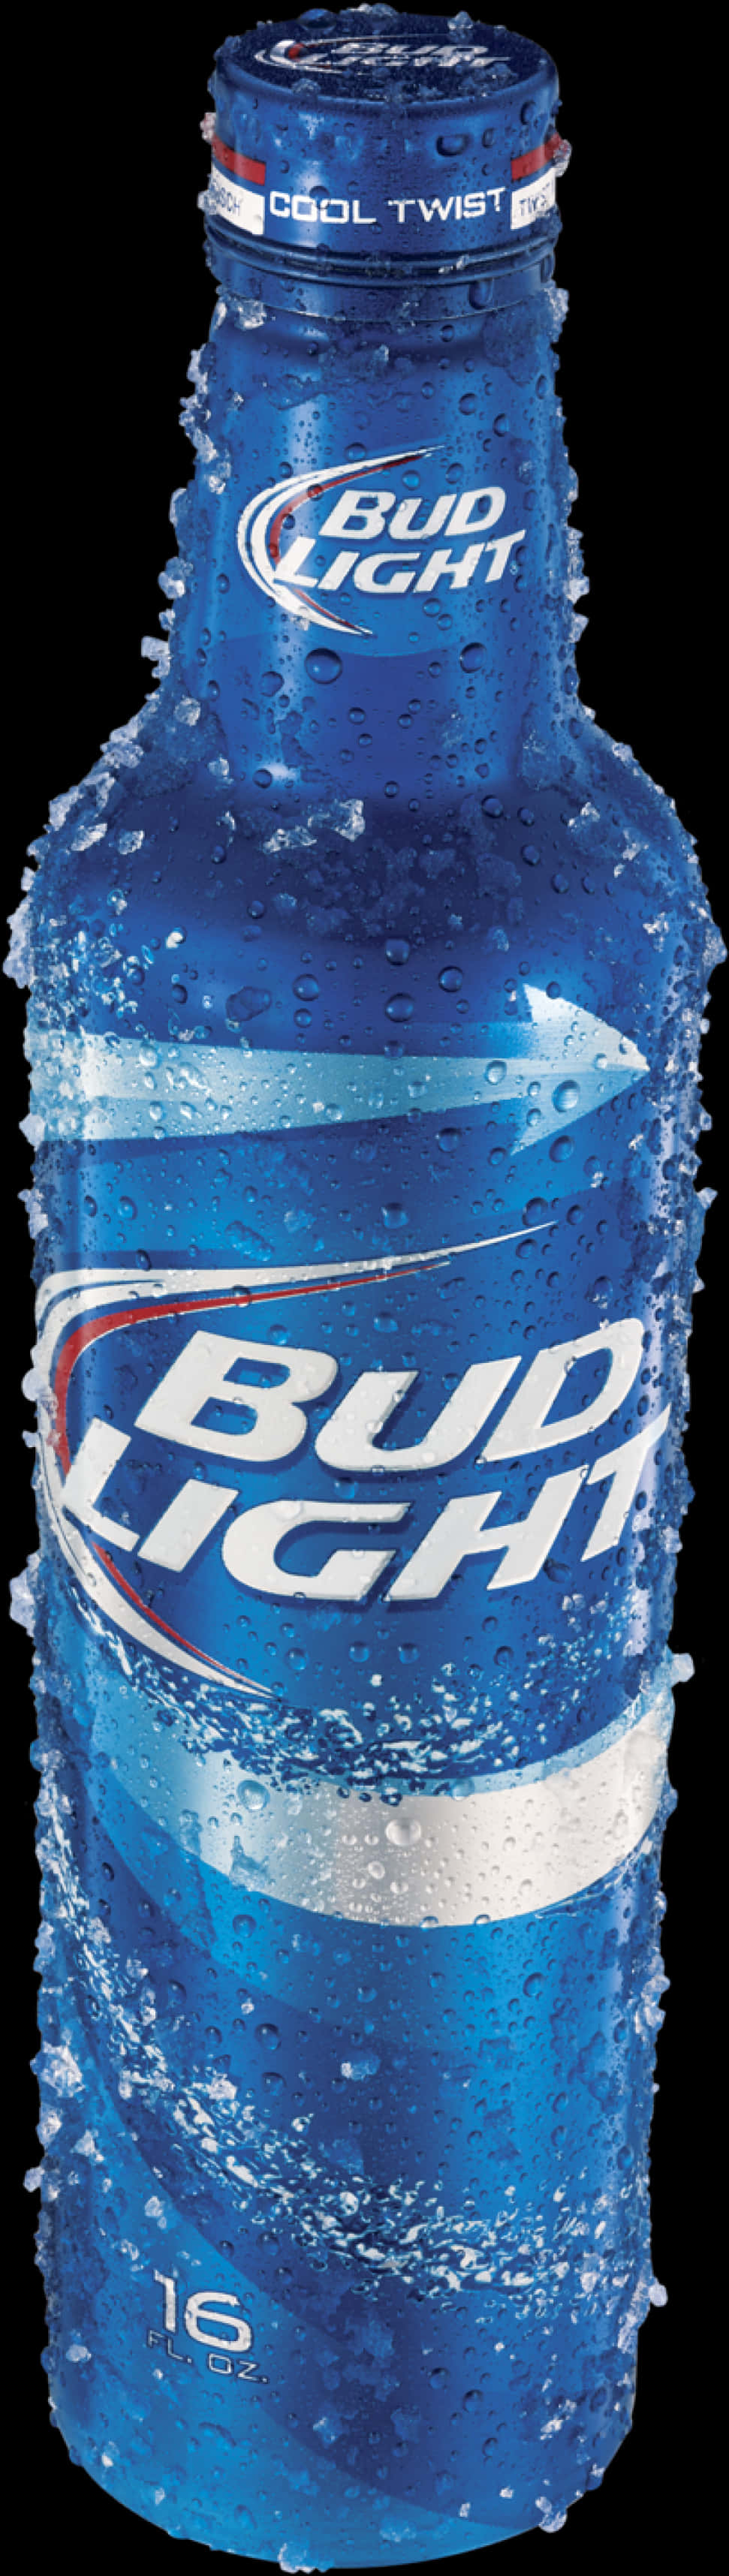 A Blue Can Of Beer With Water Drops On It